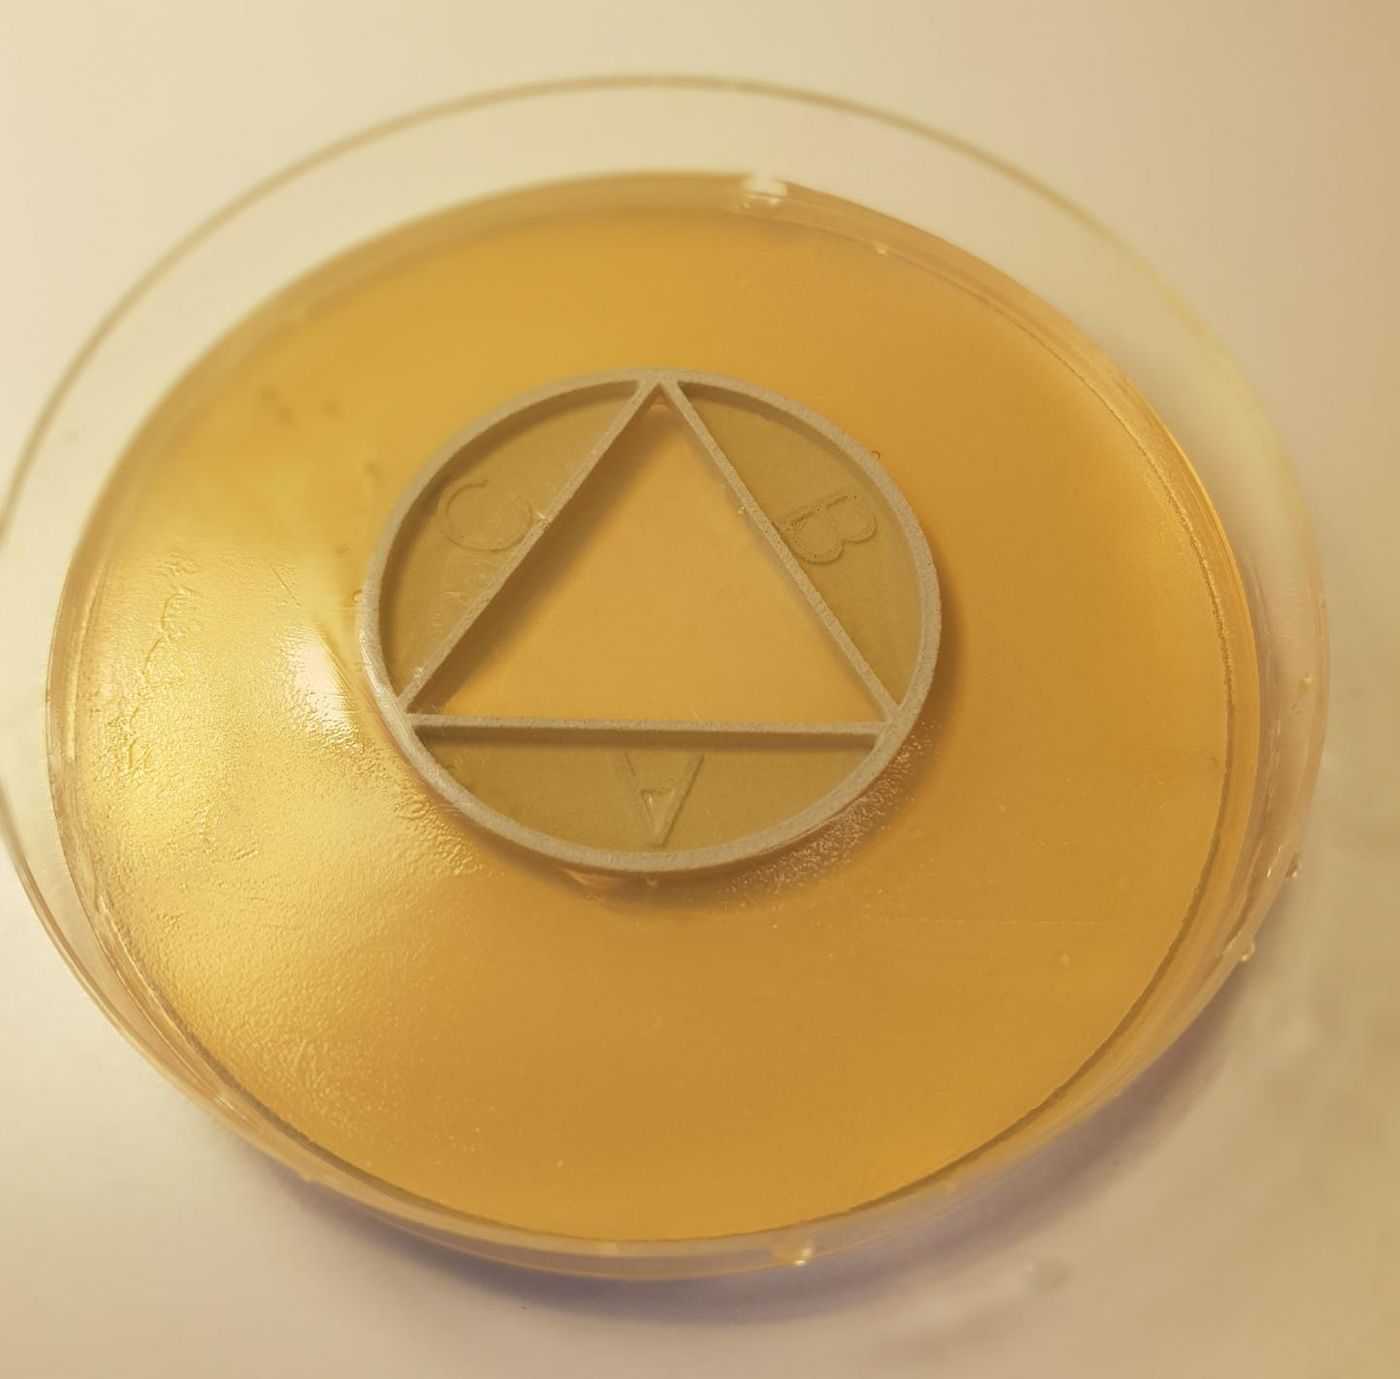 With a modified agar plate called CombiANT, high-speed tests can be performed that show how bacteria react to different combinations of antibiotics. / Credit: Nikos Fatsis-Kavalopoulos